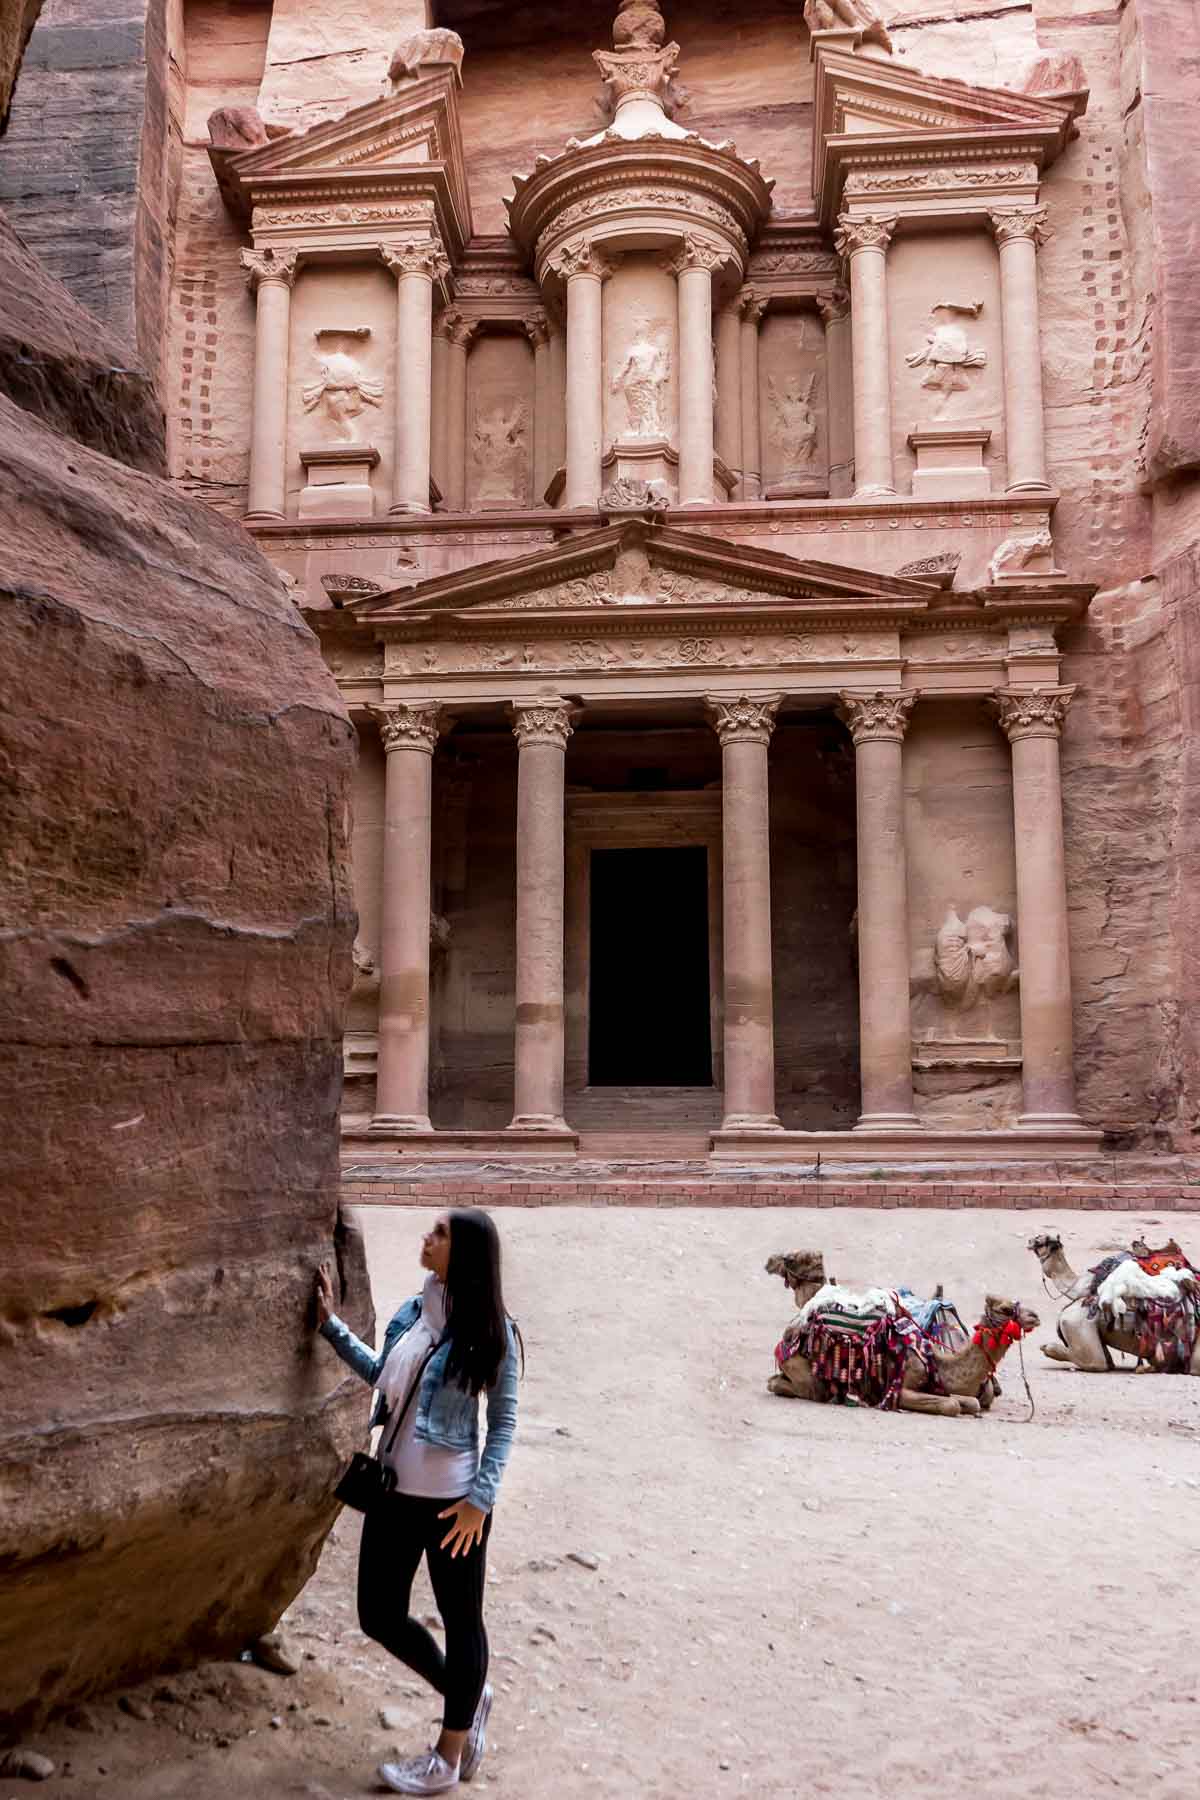 Girl in a denim jacket and jeans standing in front of the Treasury in Petra, Jordan